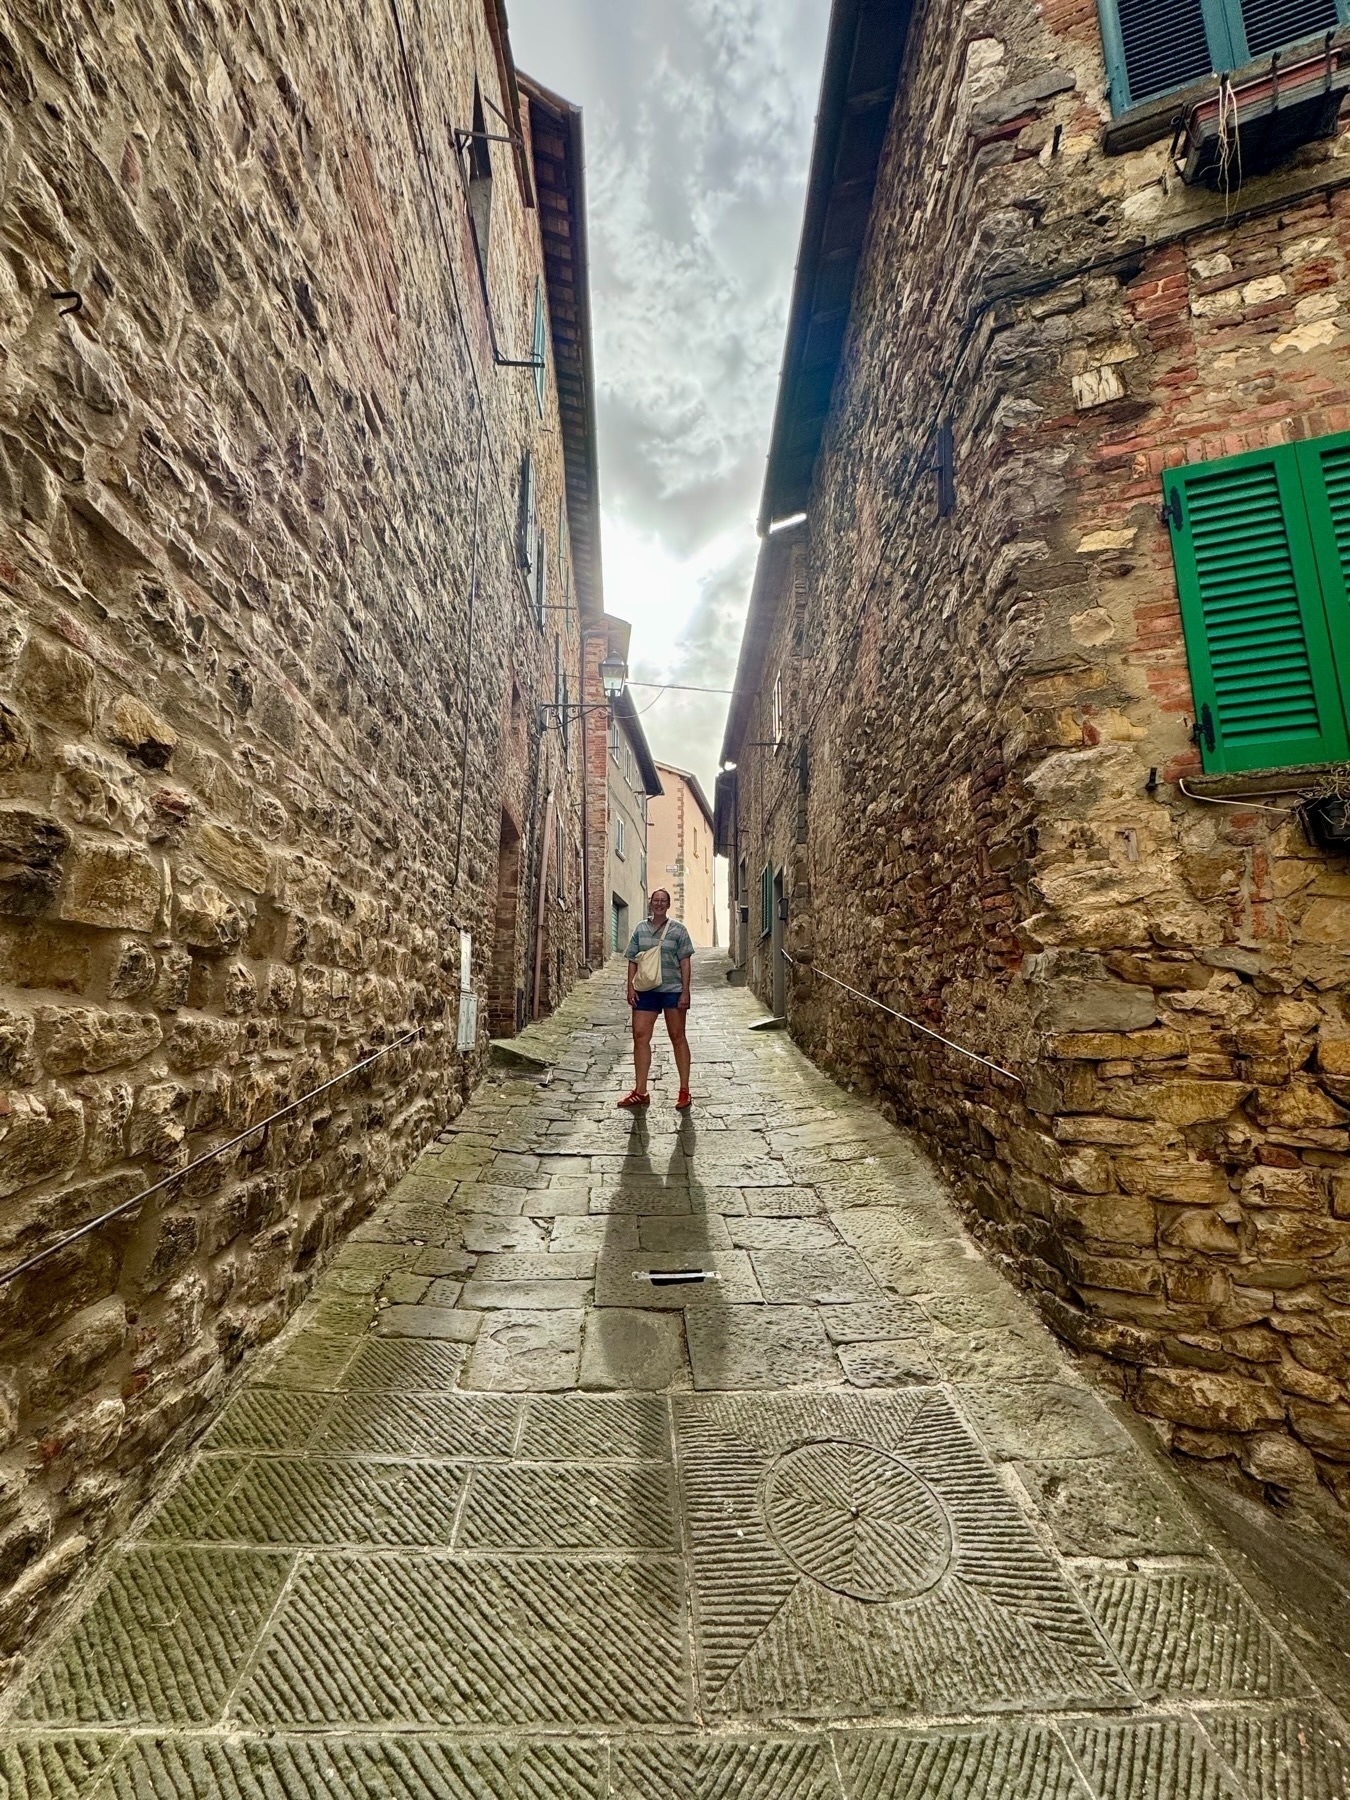 A person stands in the middle of a narrow, cobblestone alleyway flanked by tall, ancient stone buildings with green shutters. The perspective of the alleyway leads the eyes towards a bright, cloudy sky.